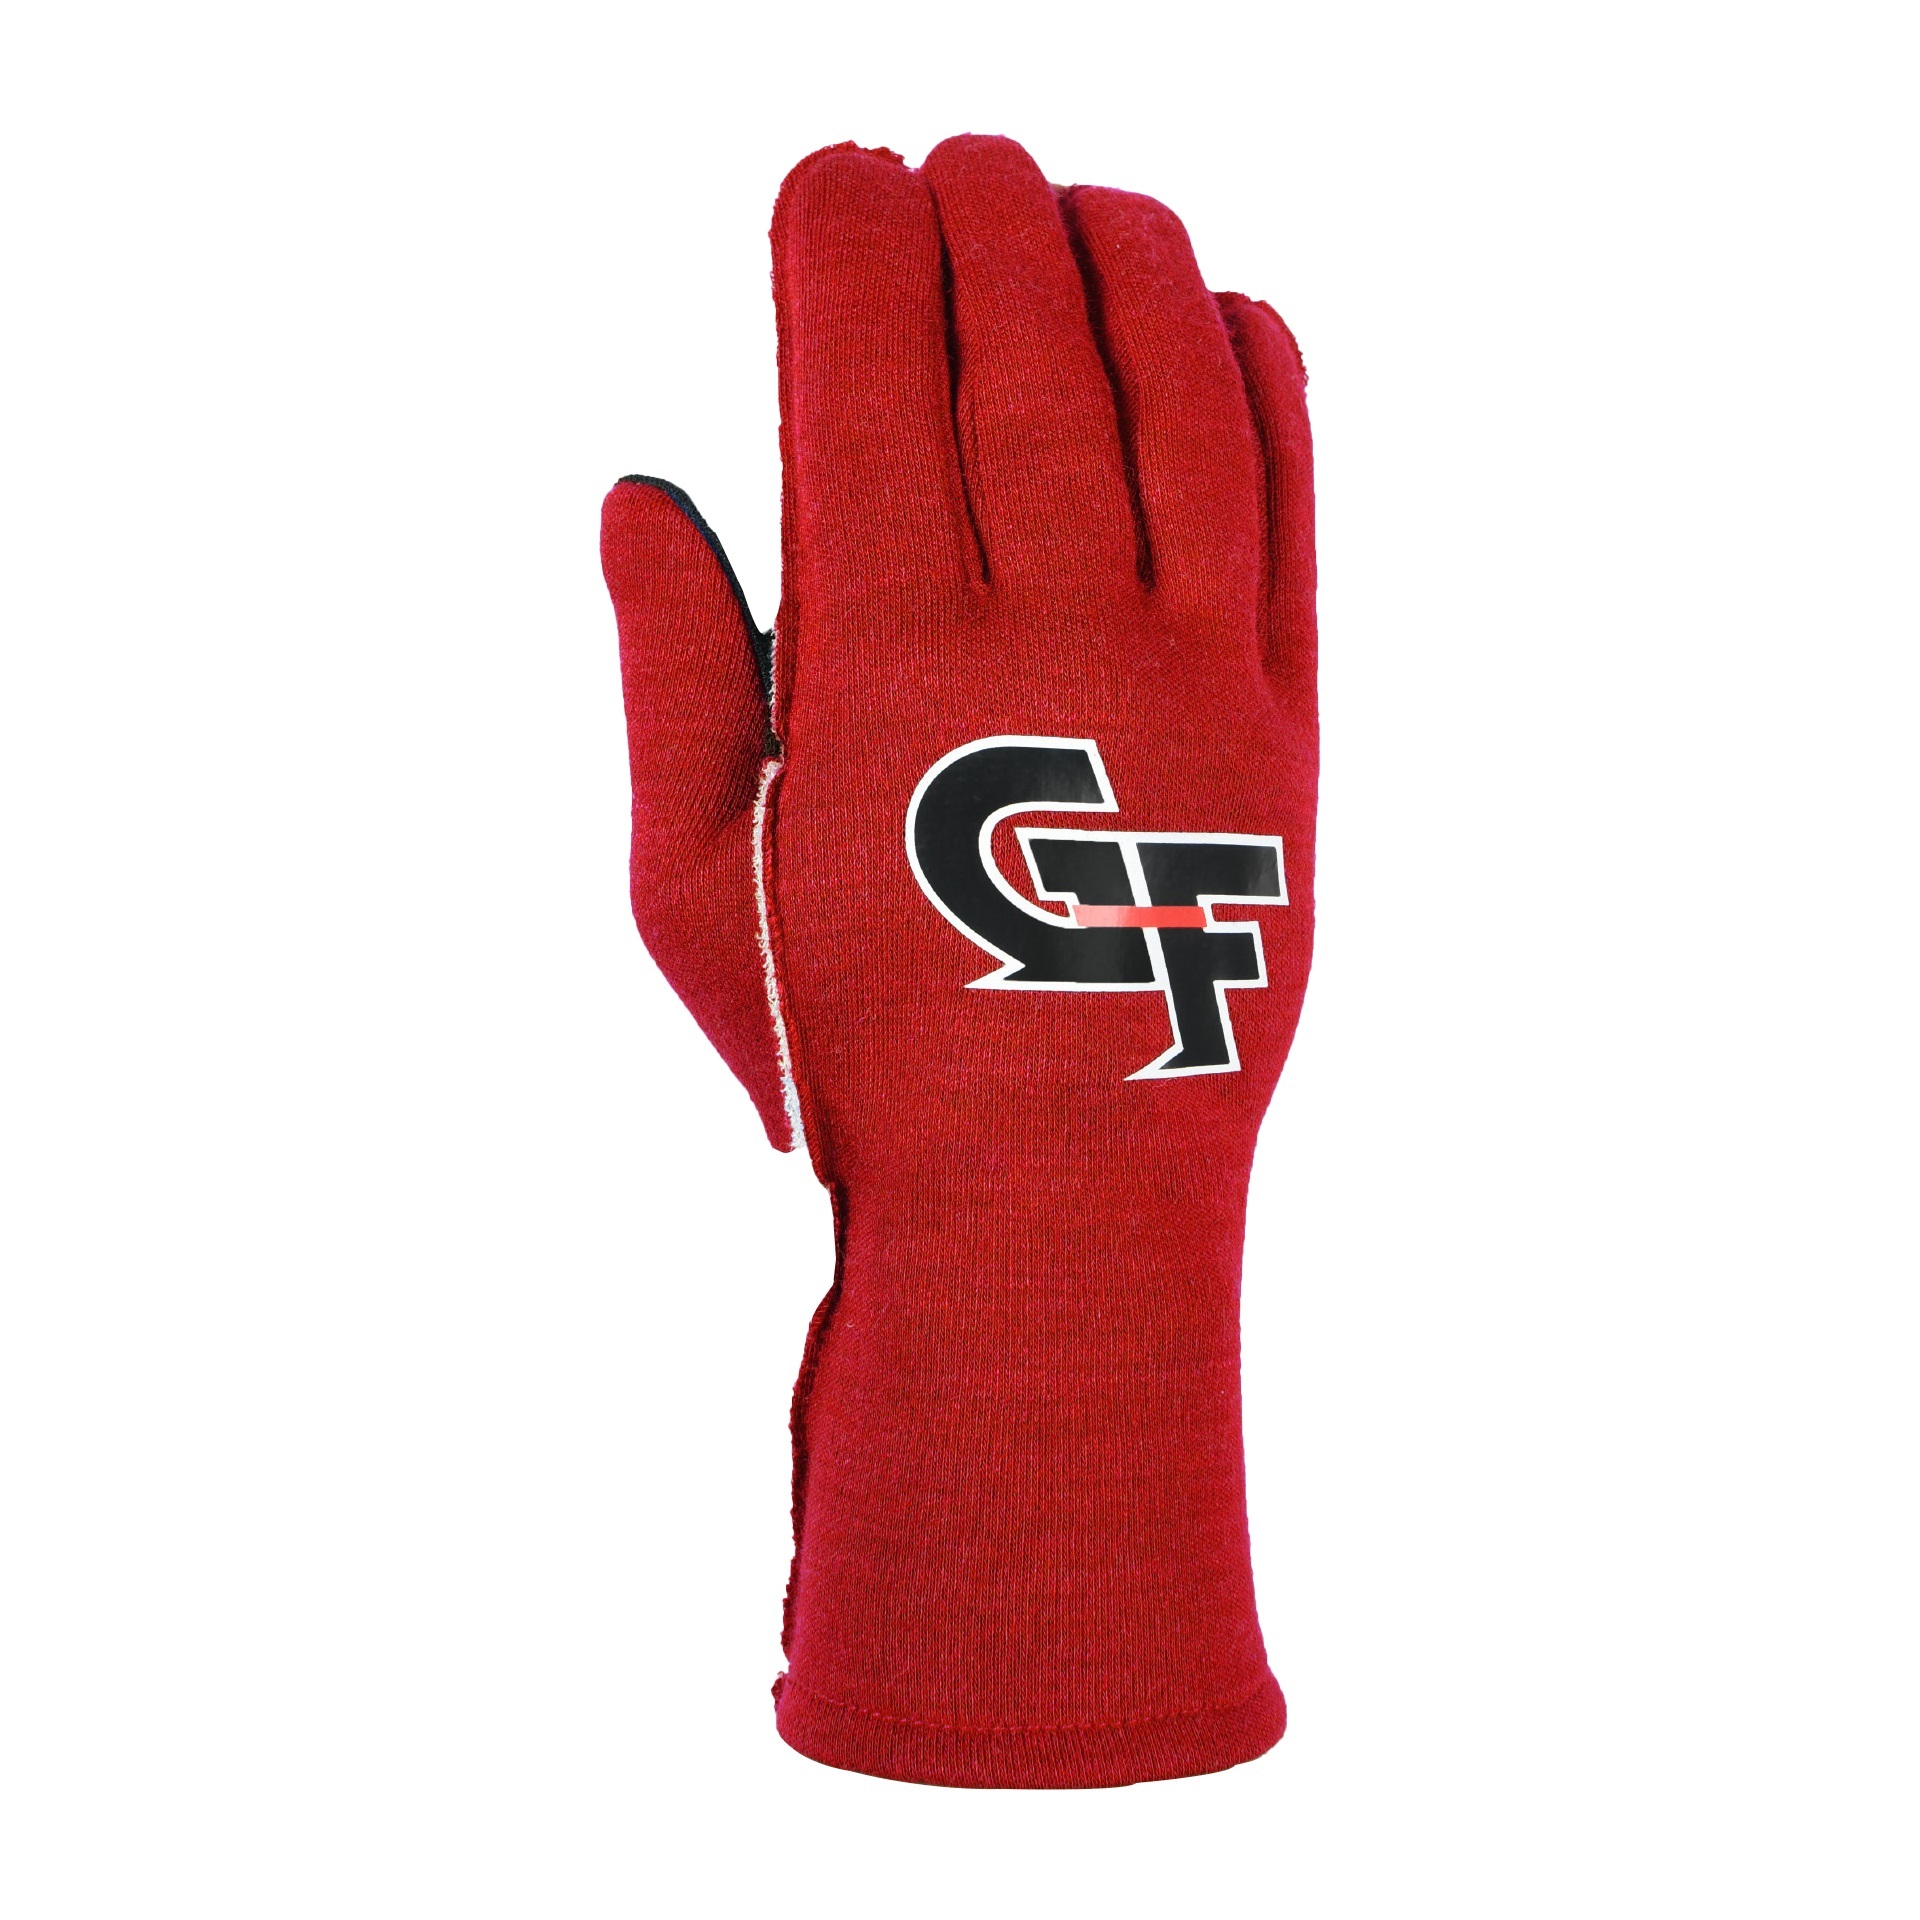 G-FORCE Gloves G-Limit Small Red